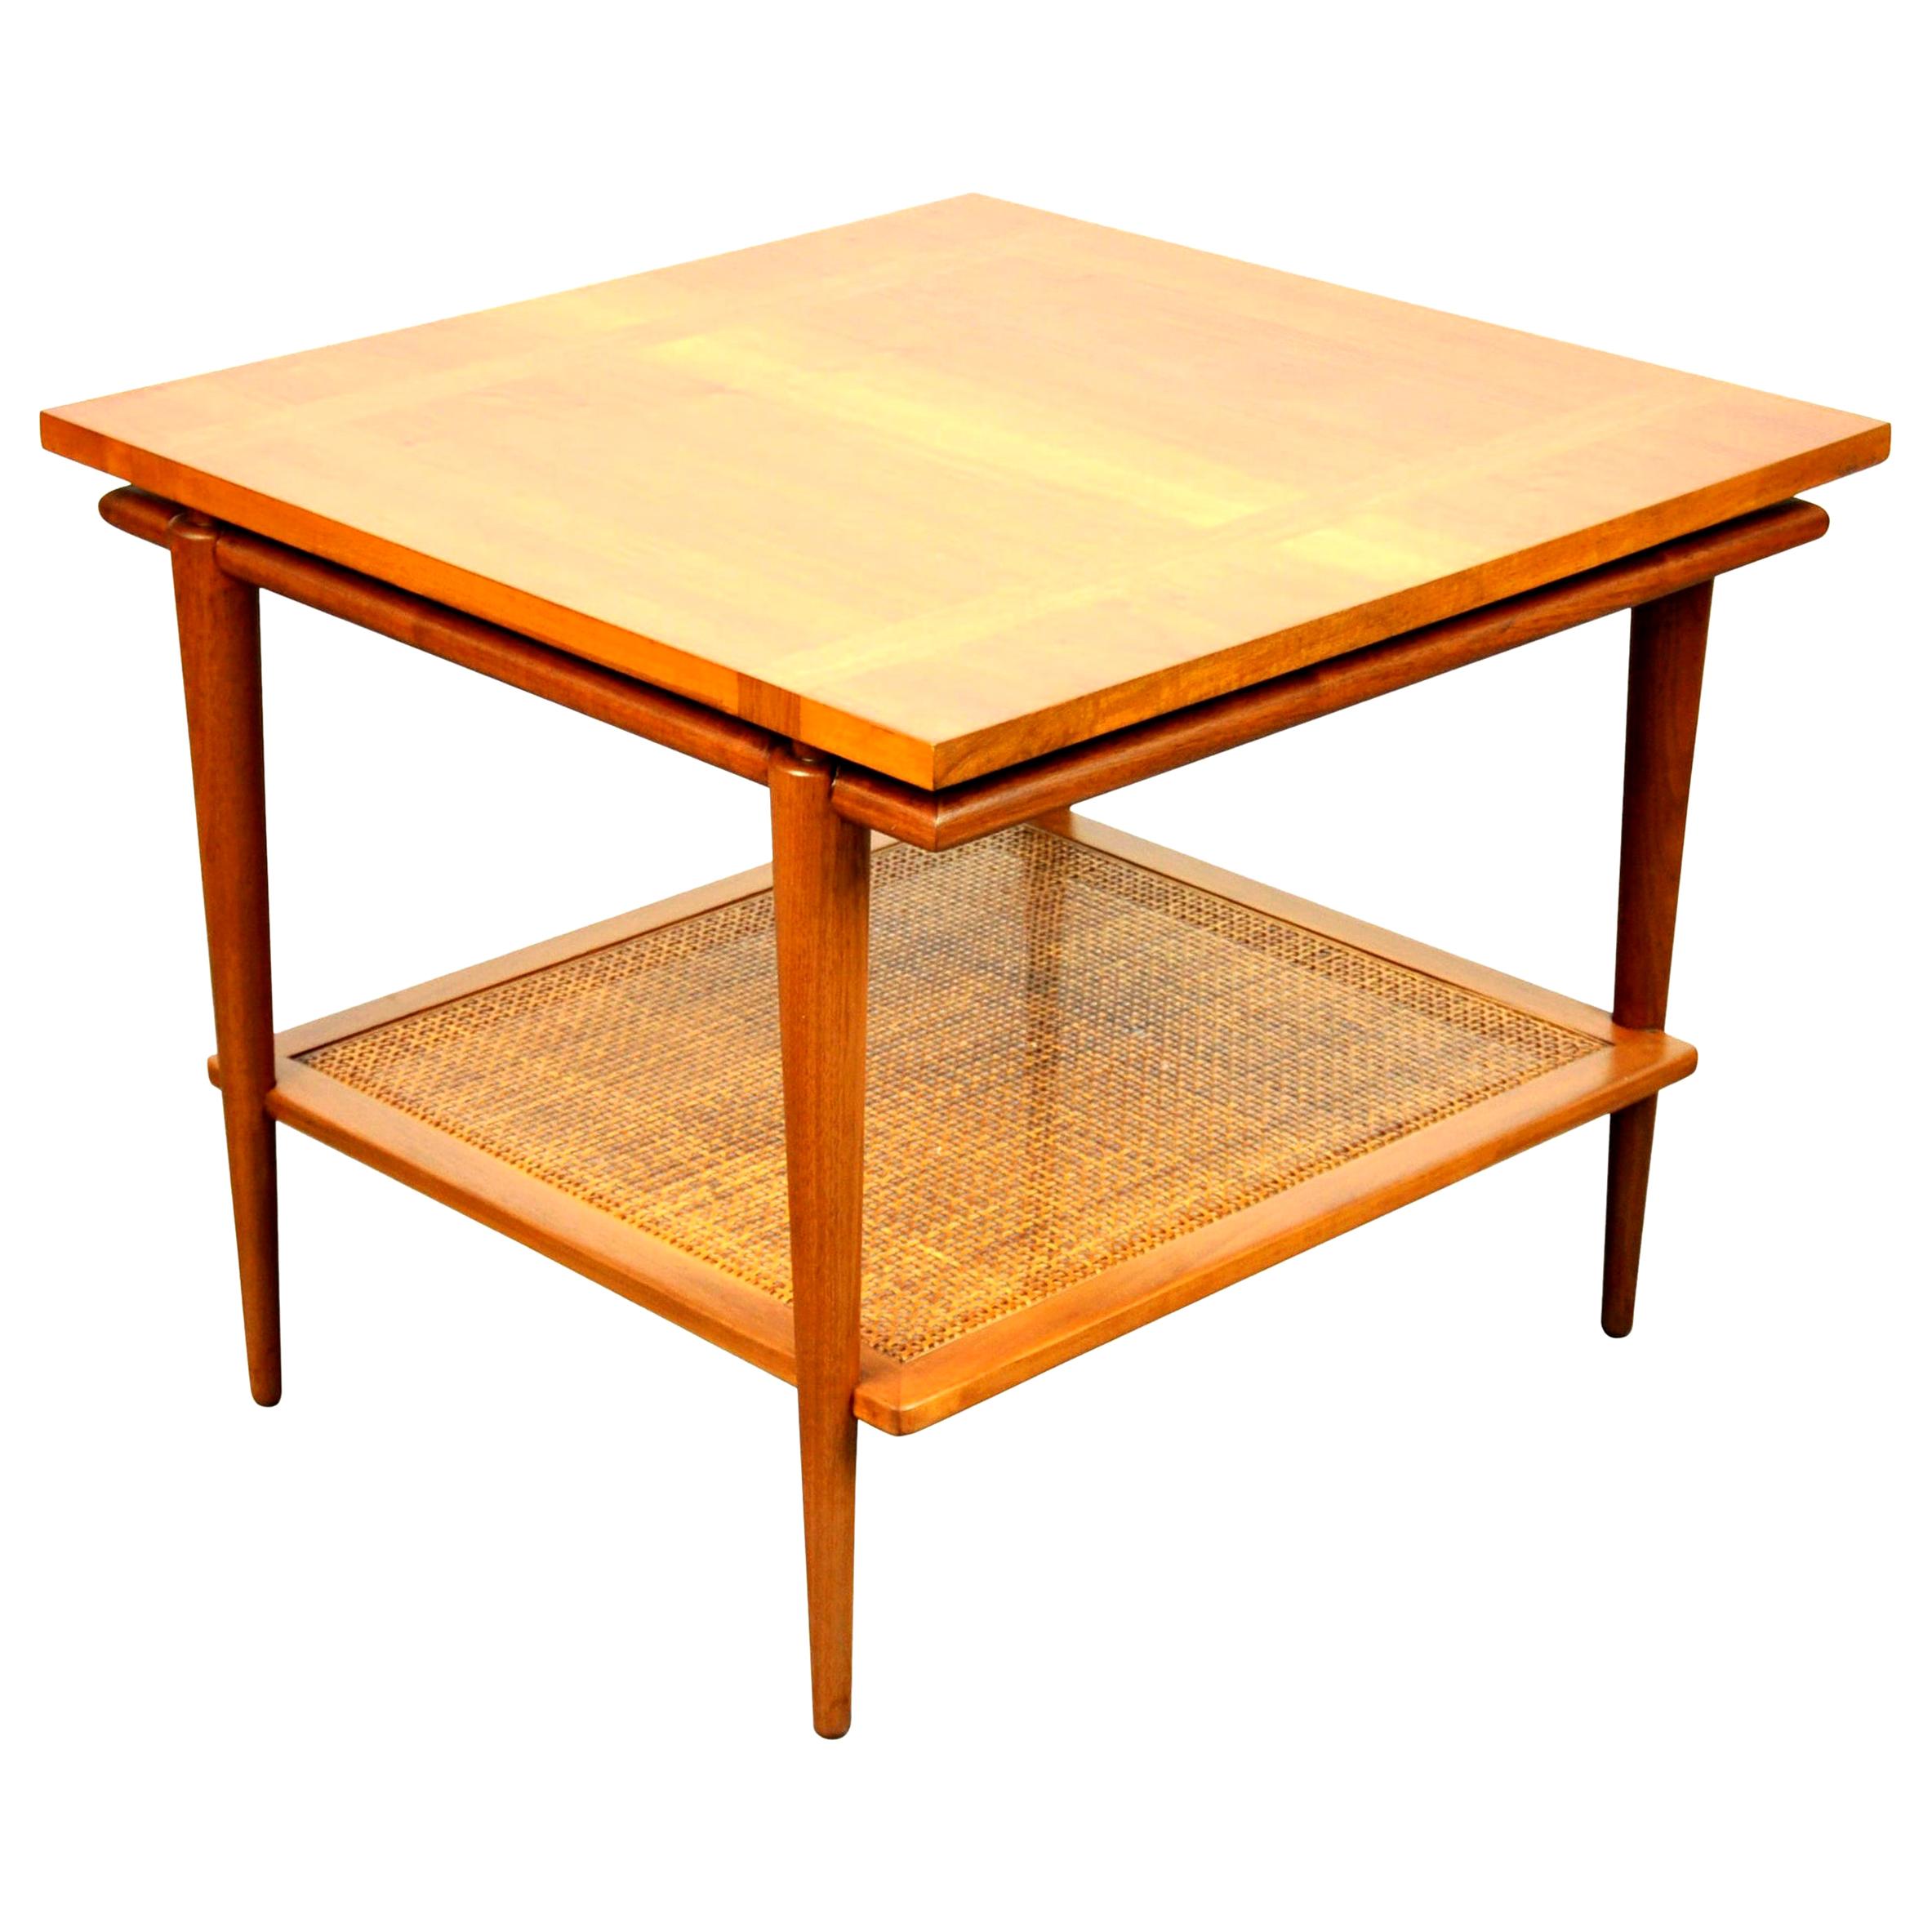 Widdicomb Two-Tier Walnut and Cane Side Table